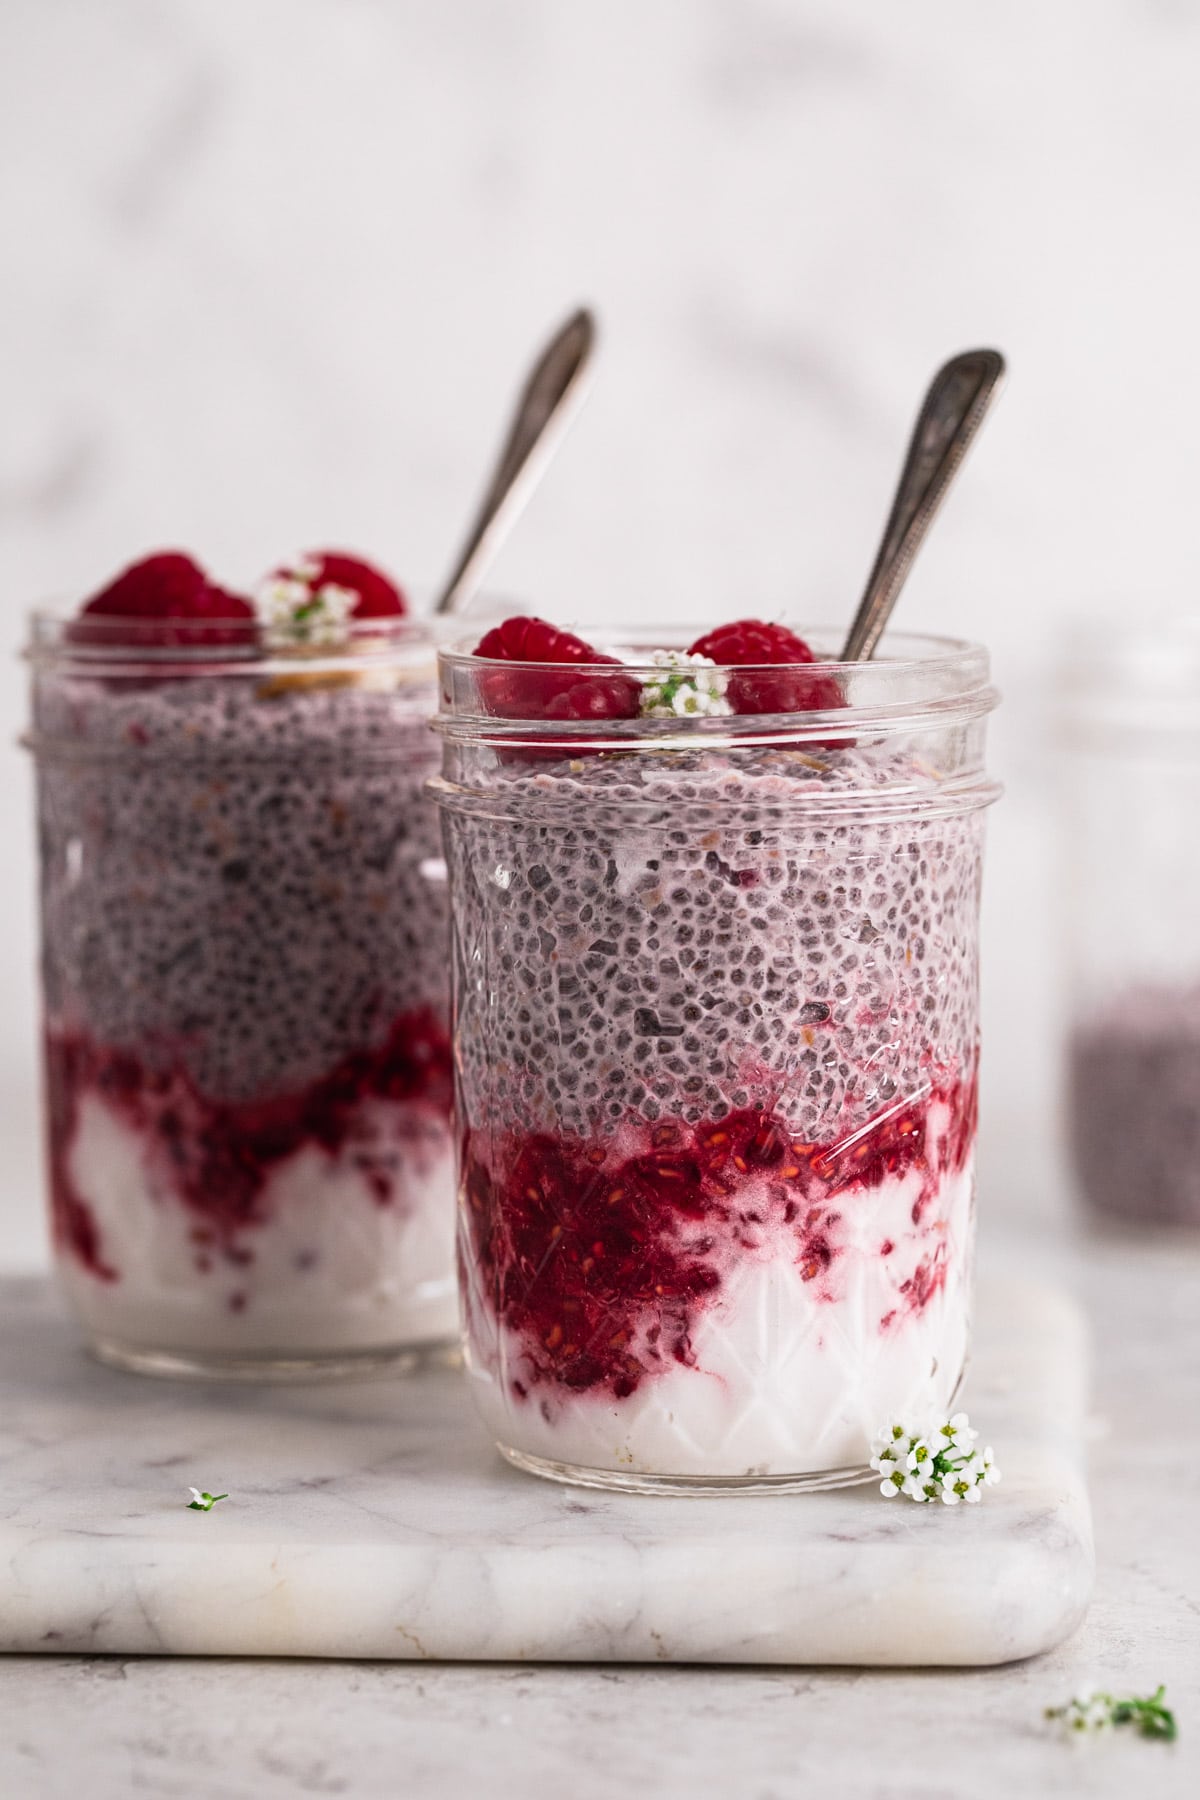 raspberry chia pudding in glass jars layered with yoghurt and mashed raspberries